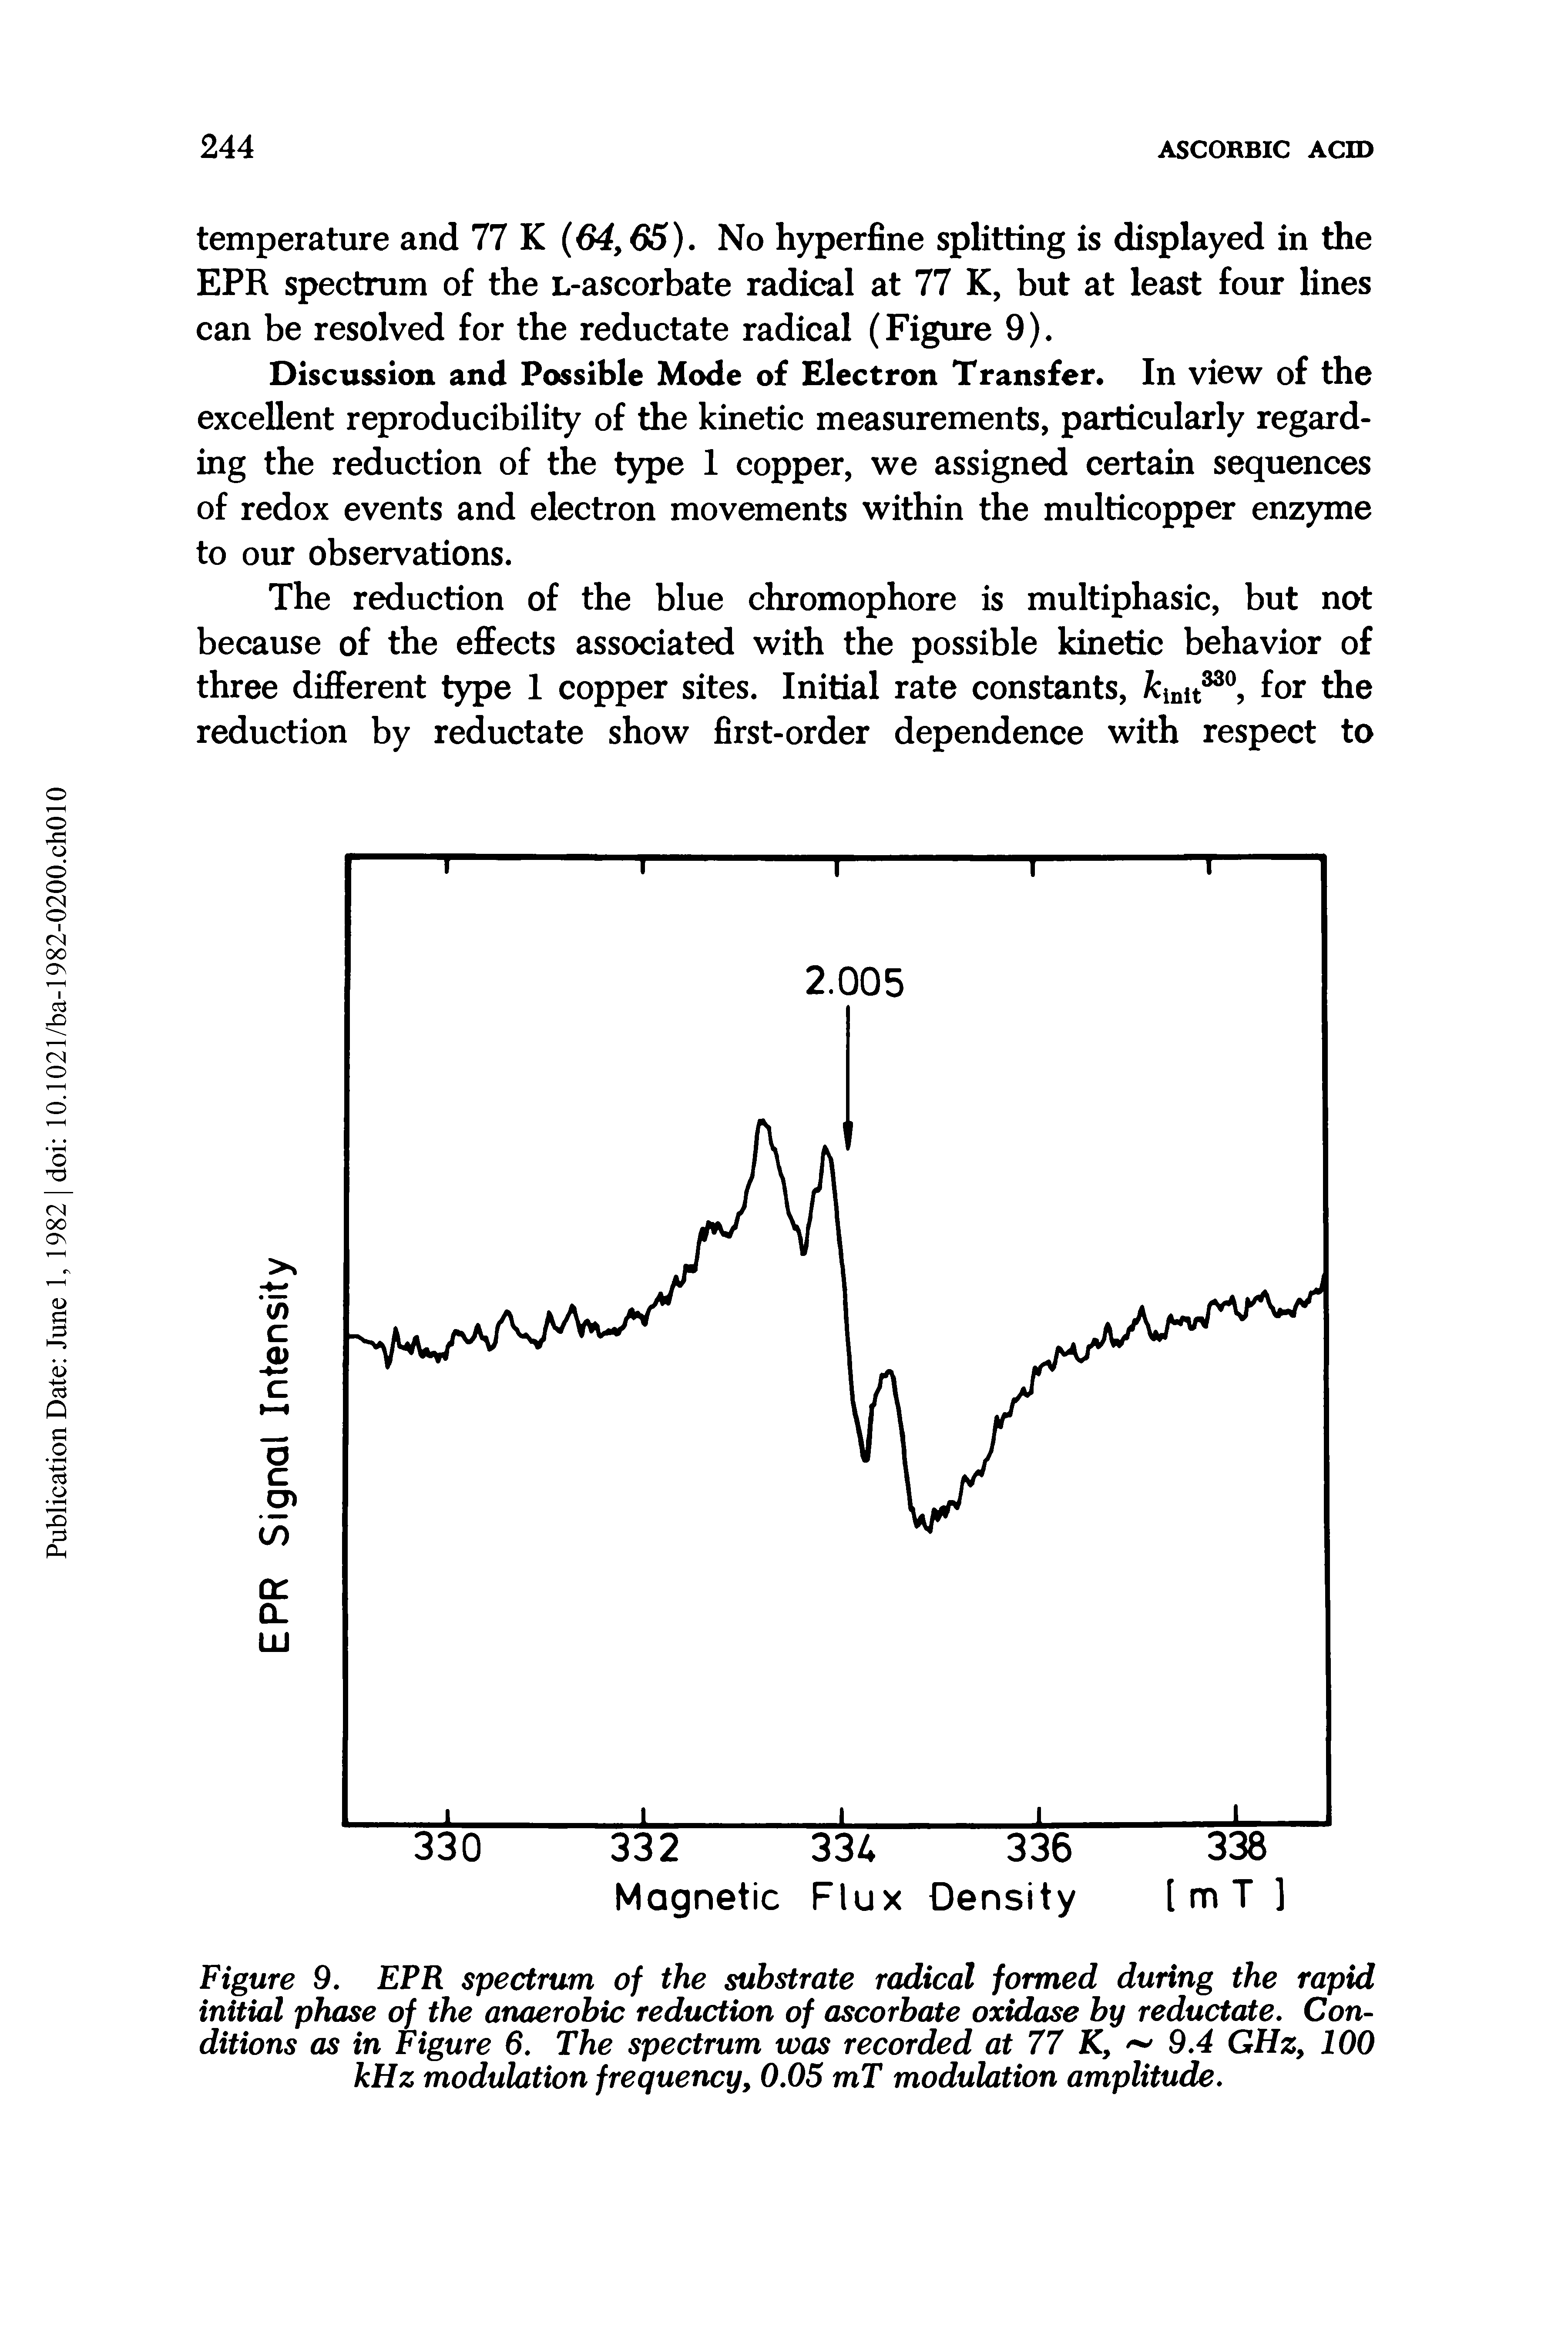 Figure 9. EPR spectrum of the substrate radical formed during the rapid initial phase of the anaerobic reduction of ascorbate oxidase by reductate. Conditions as in Figure 6. The spectrum was recorded at 77 K, 9.4 GHz, 100 kHz modulation frequency, 0.05 mT modulation amplitude.